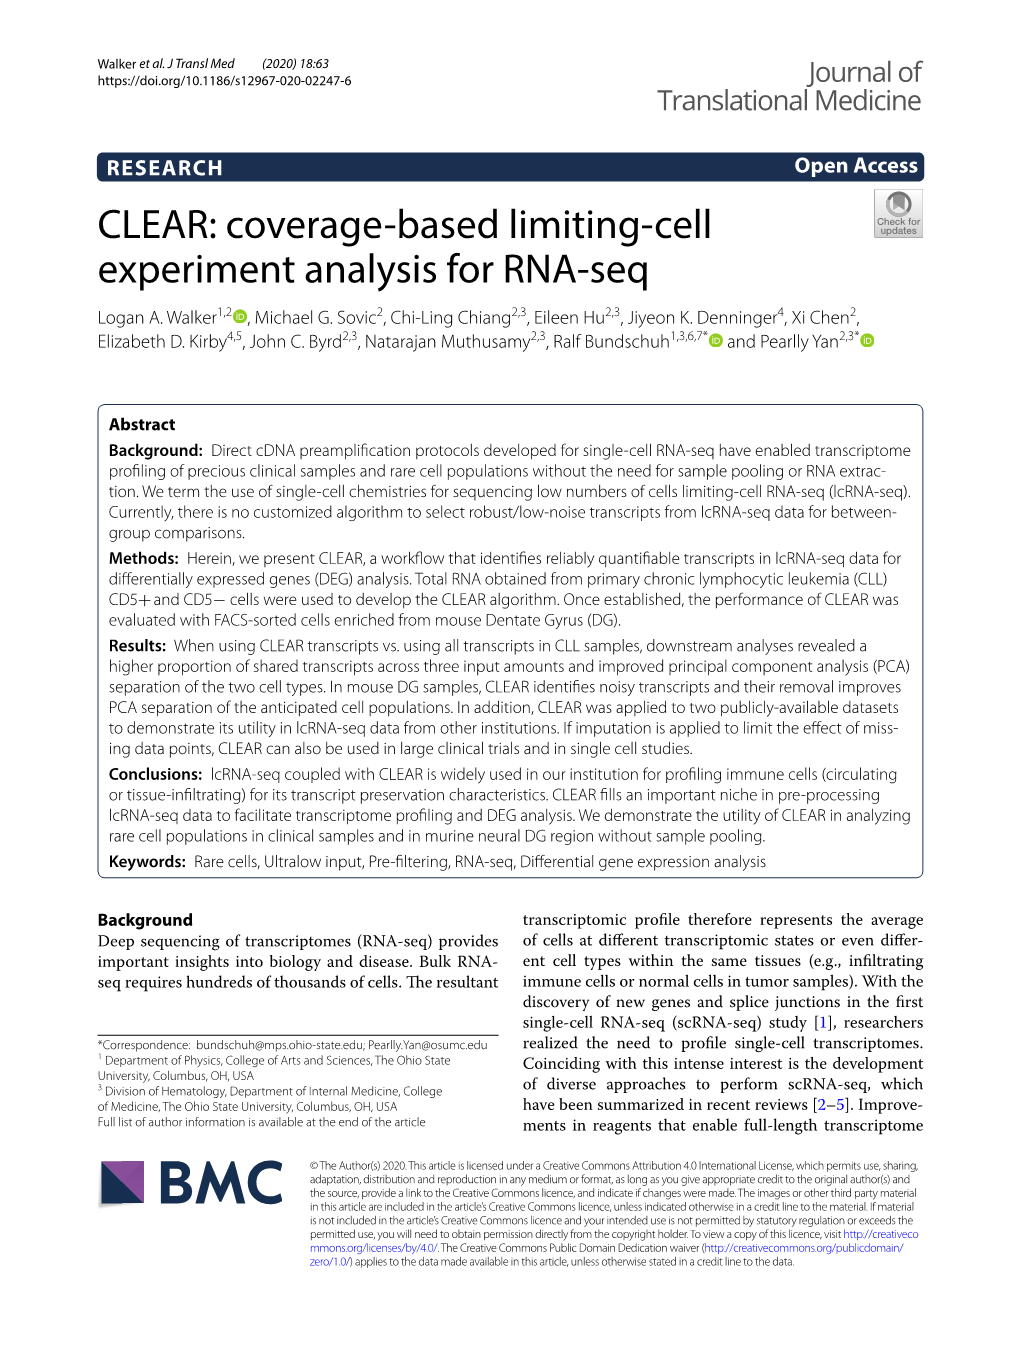 CLEAR: Coverage-Based Limiting-Cell Experiment Analysis for RNA-Seq